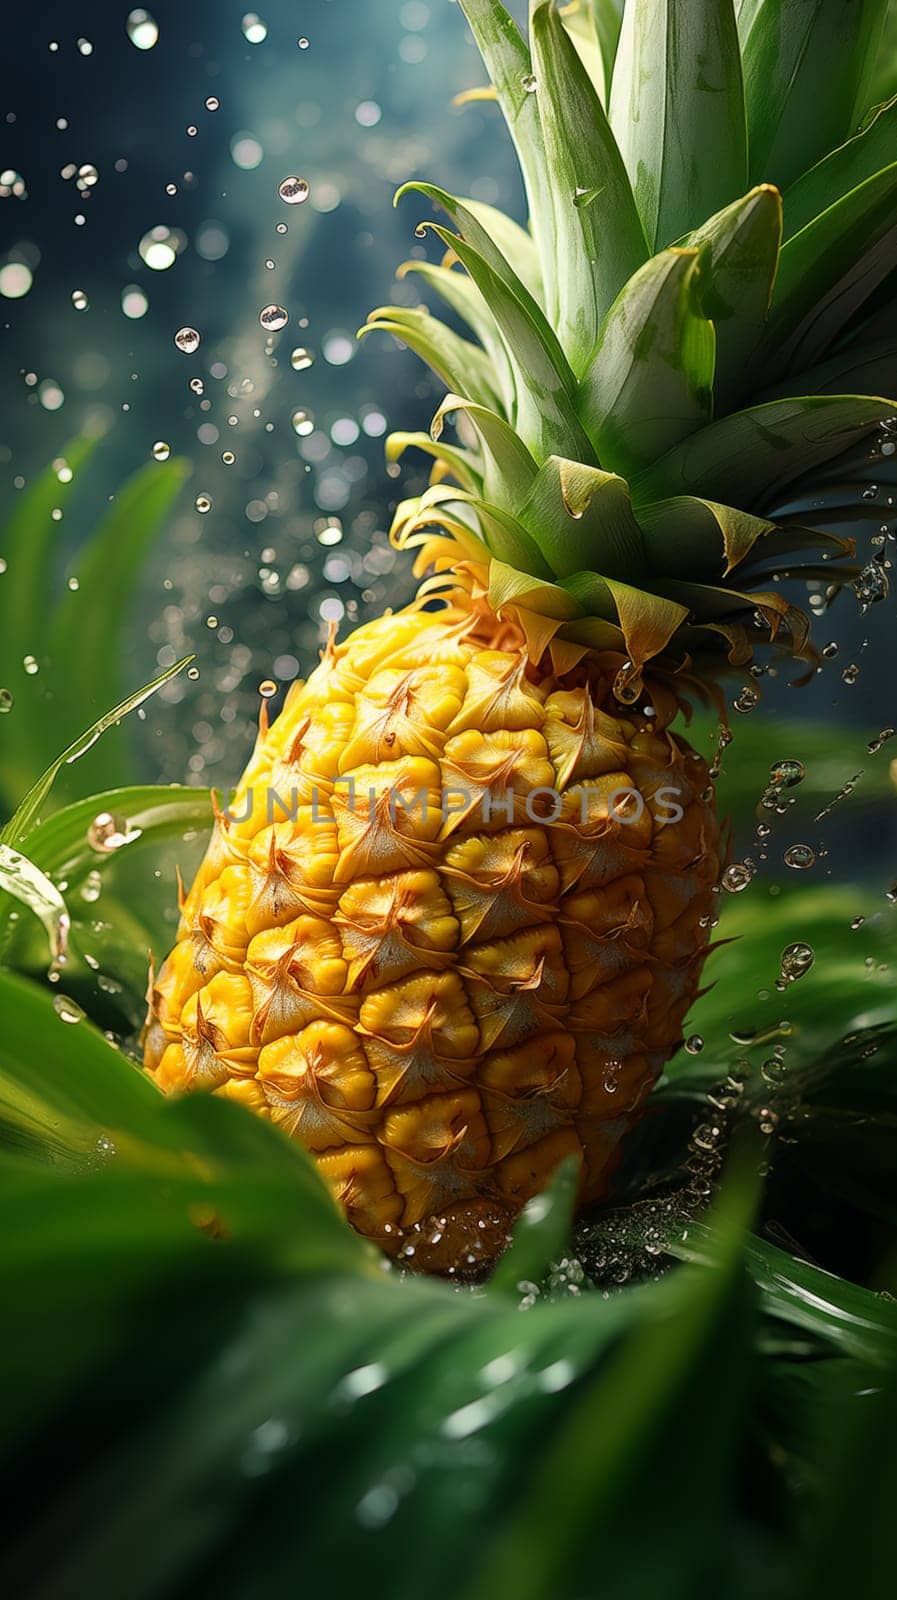 Close up pineapple falls under water, with splashes and air bubbles. Vertical